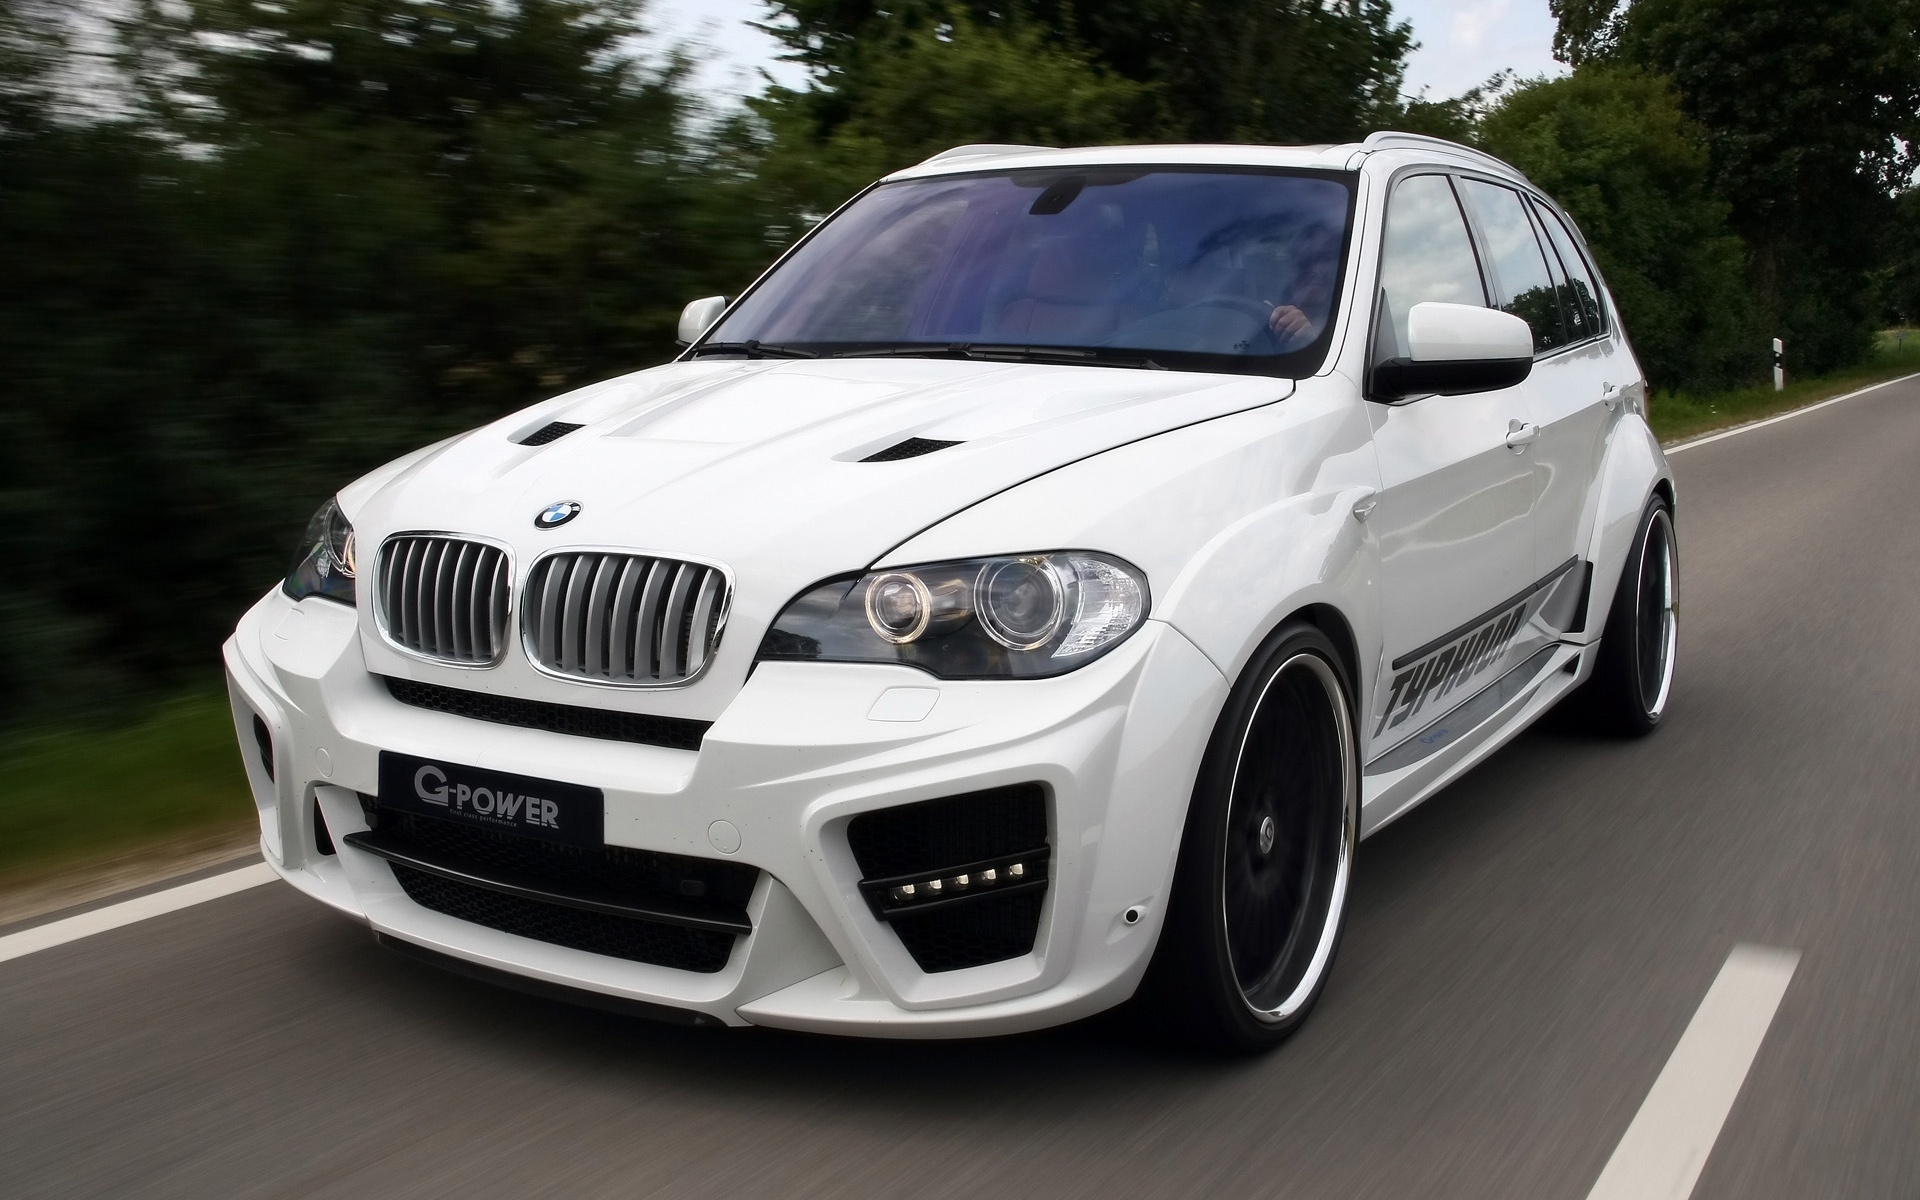 BMW X5 Typhoon RS 2010 G Power for 1920 x 1200 widescreen resolution